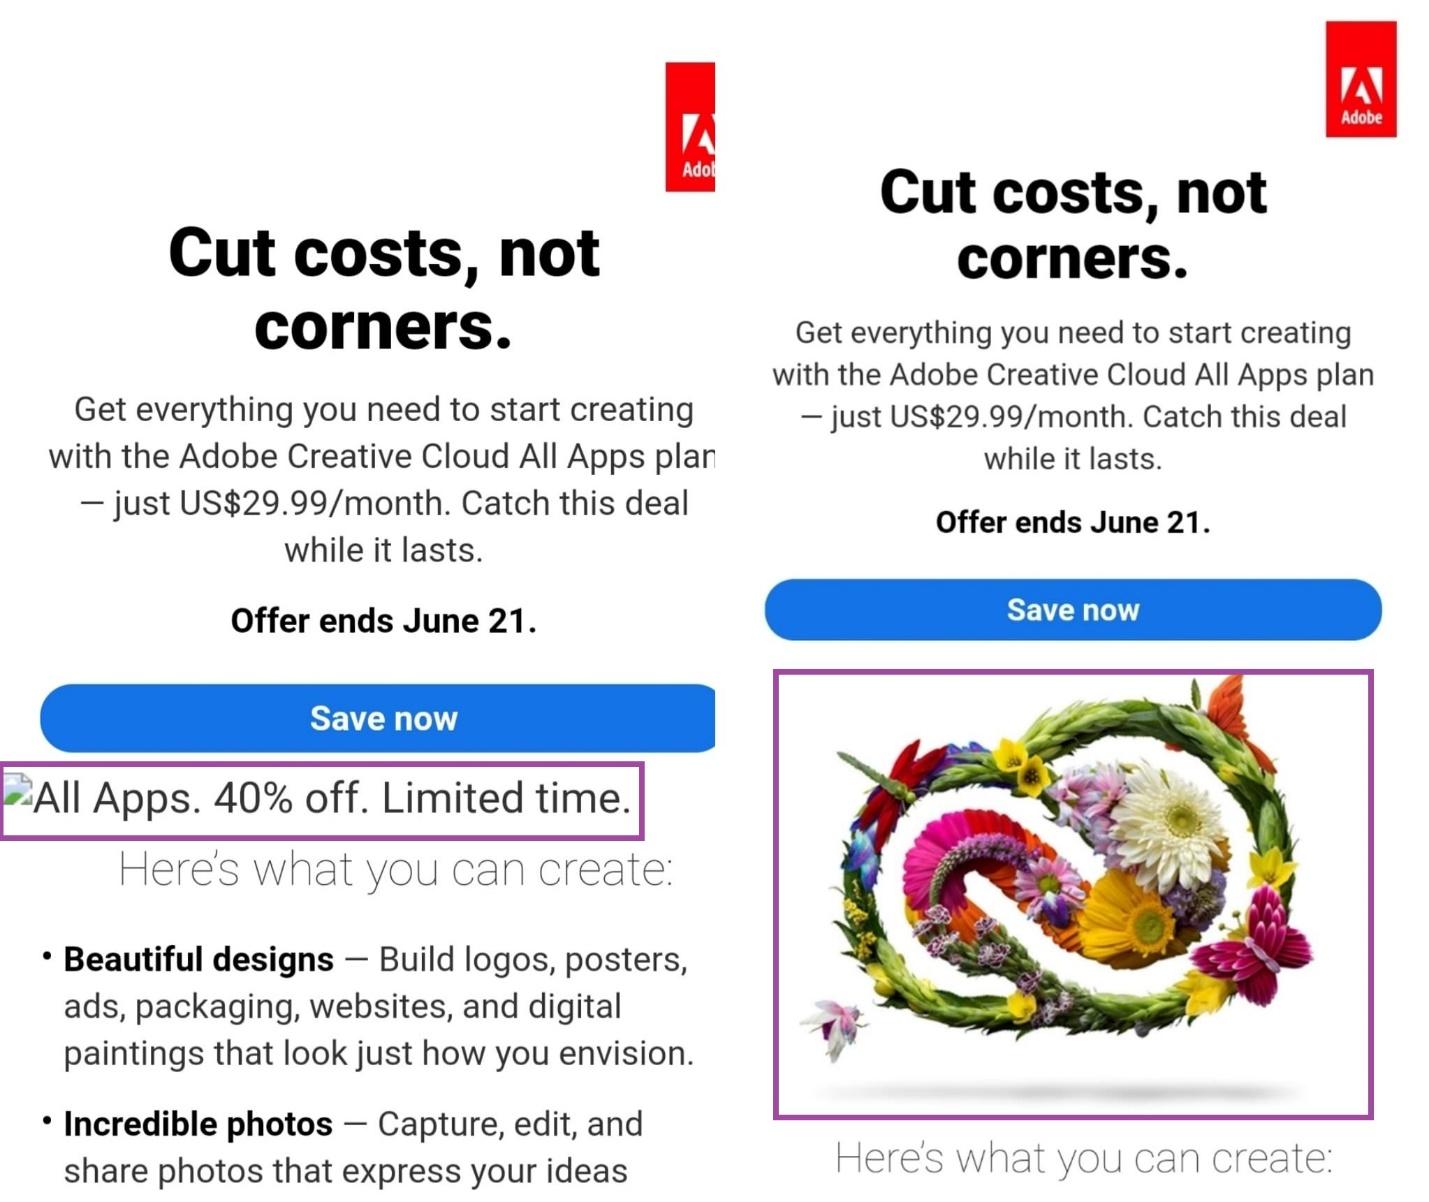 Adobe Creative Cloud shows a broken link for an image example that they’ve backed up with alternative text explaining the important information viewers still would want to know. The second image is how the email should have rendered in the first place.